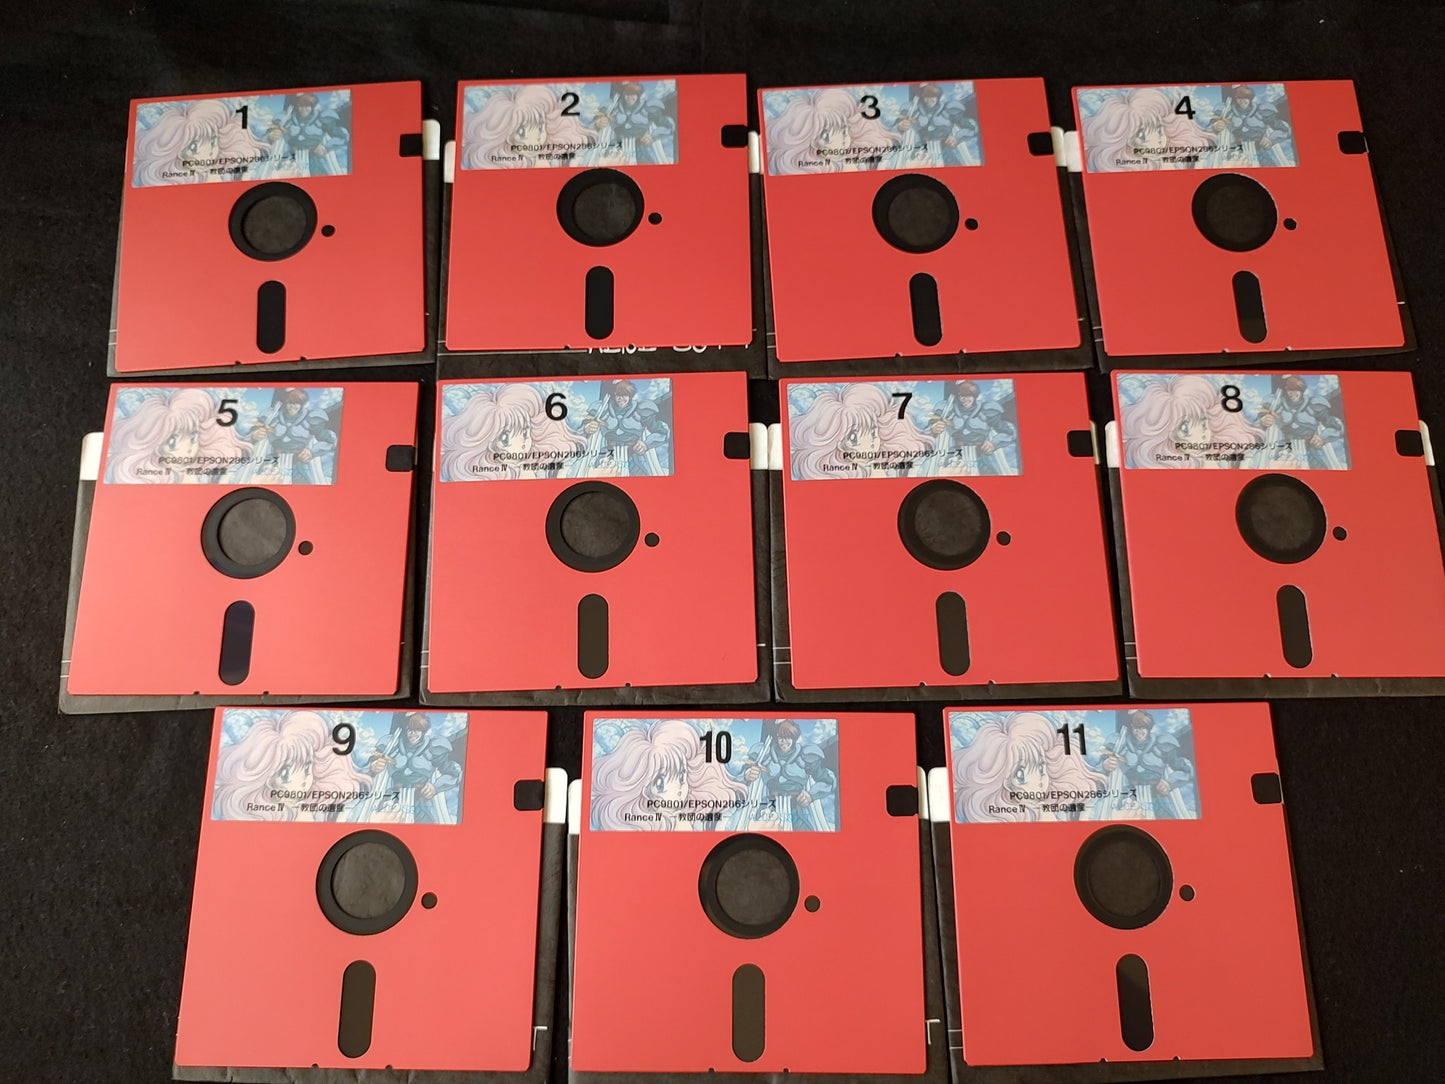 PC-9801 PC98 Rance 4 Game Floppy disks, w/Manual, Box set,Not tested-f0626